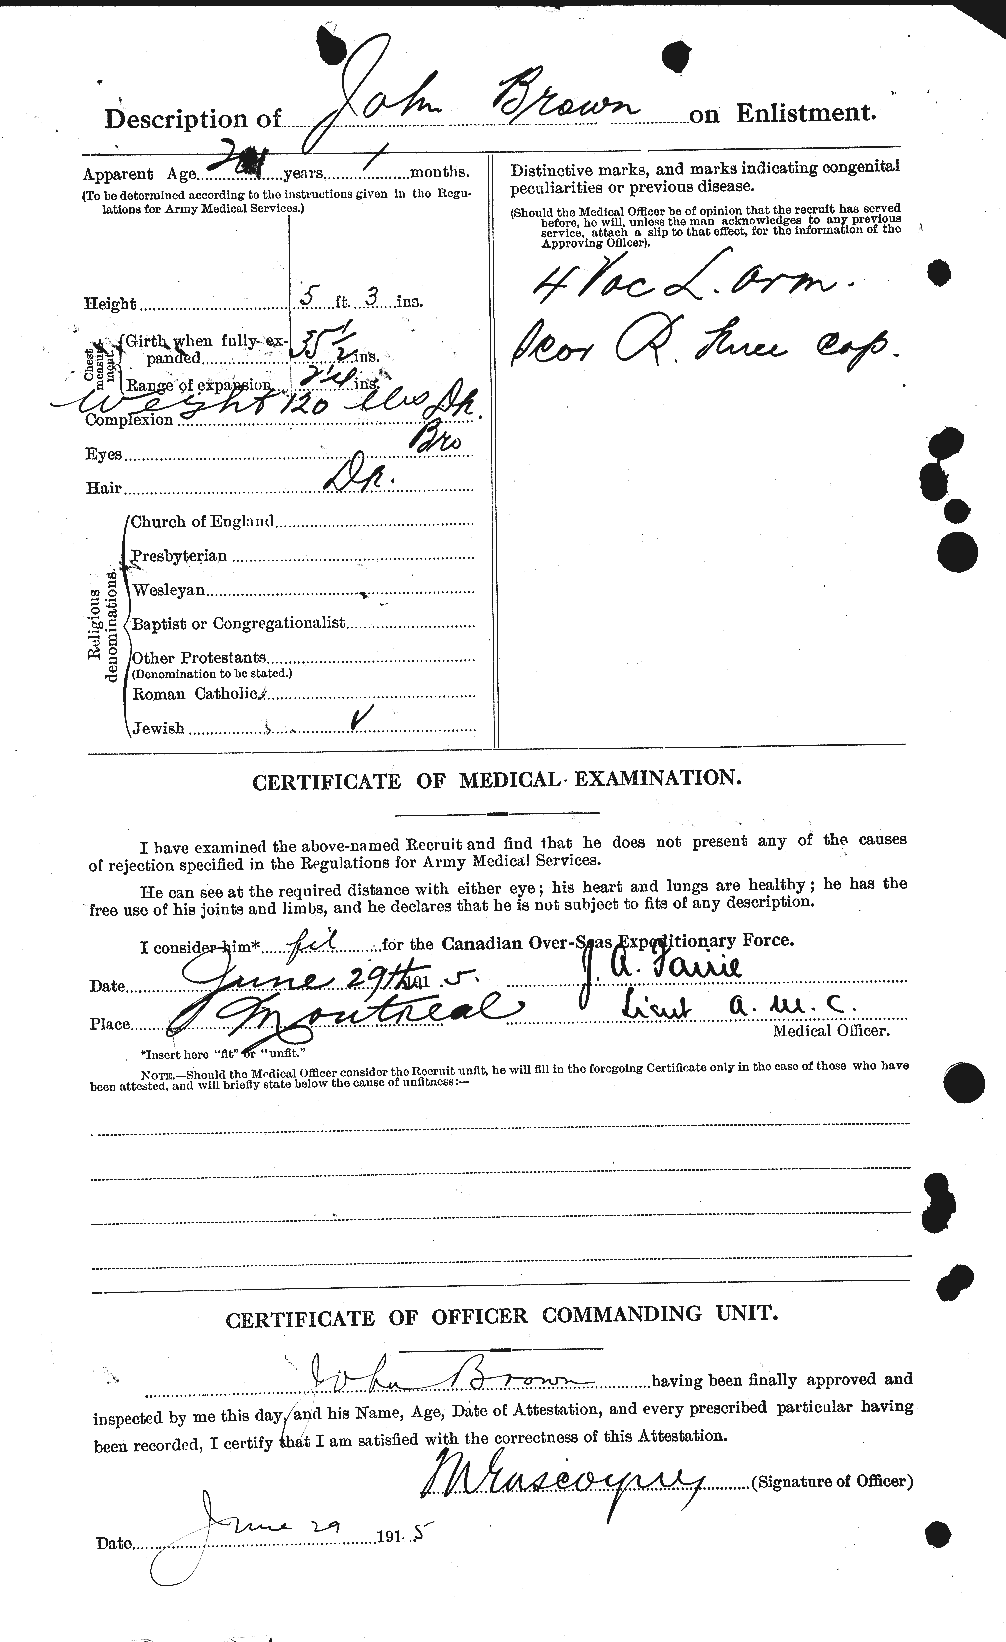 Personnel Records of the First World War - CEF 263886b